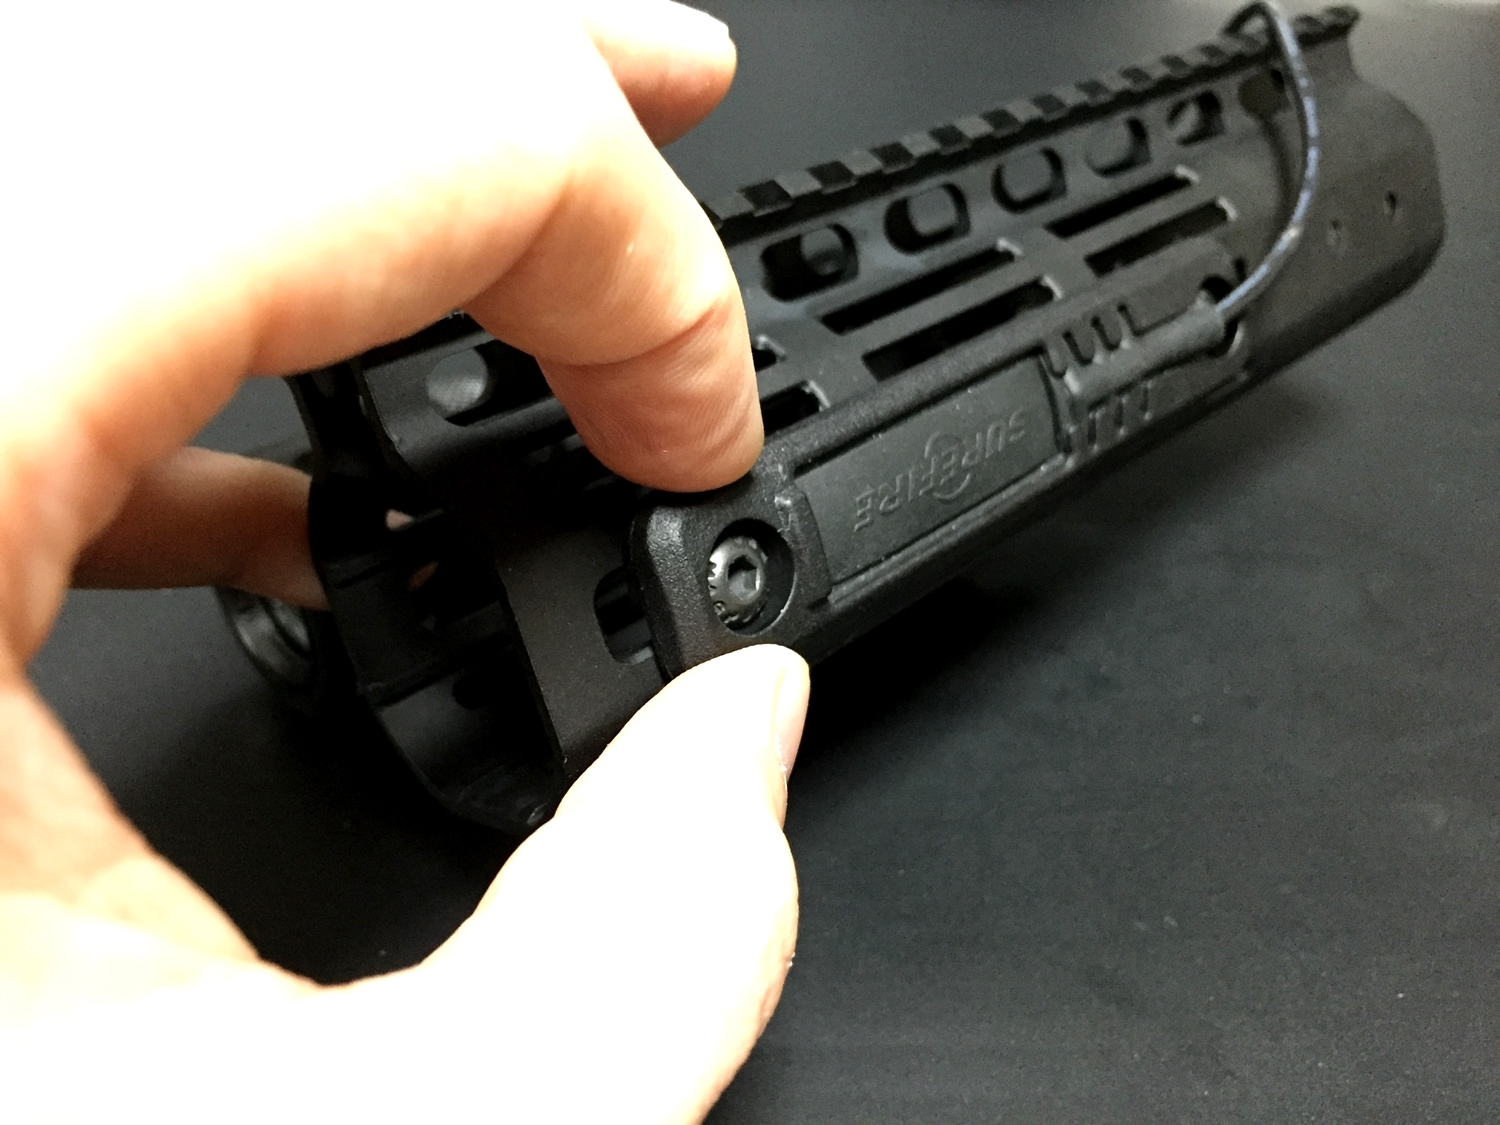 20 M-LOK MAGPUL Tape Switch Mounting Plate for Surefire ST Polymer MADE IN USA マグプル 実物 本家 テープ リモート スイッチ